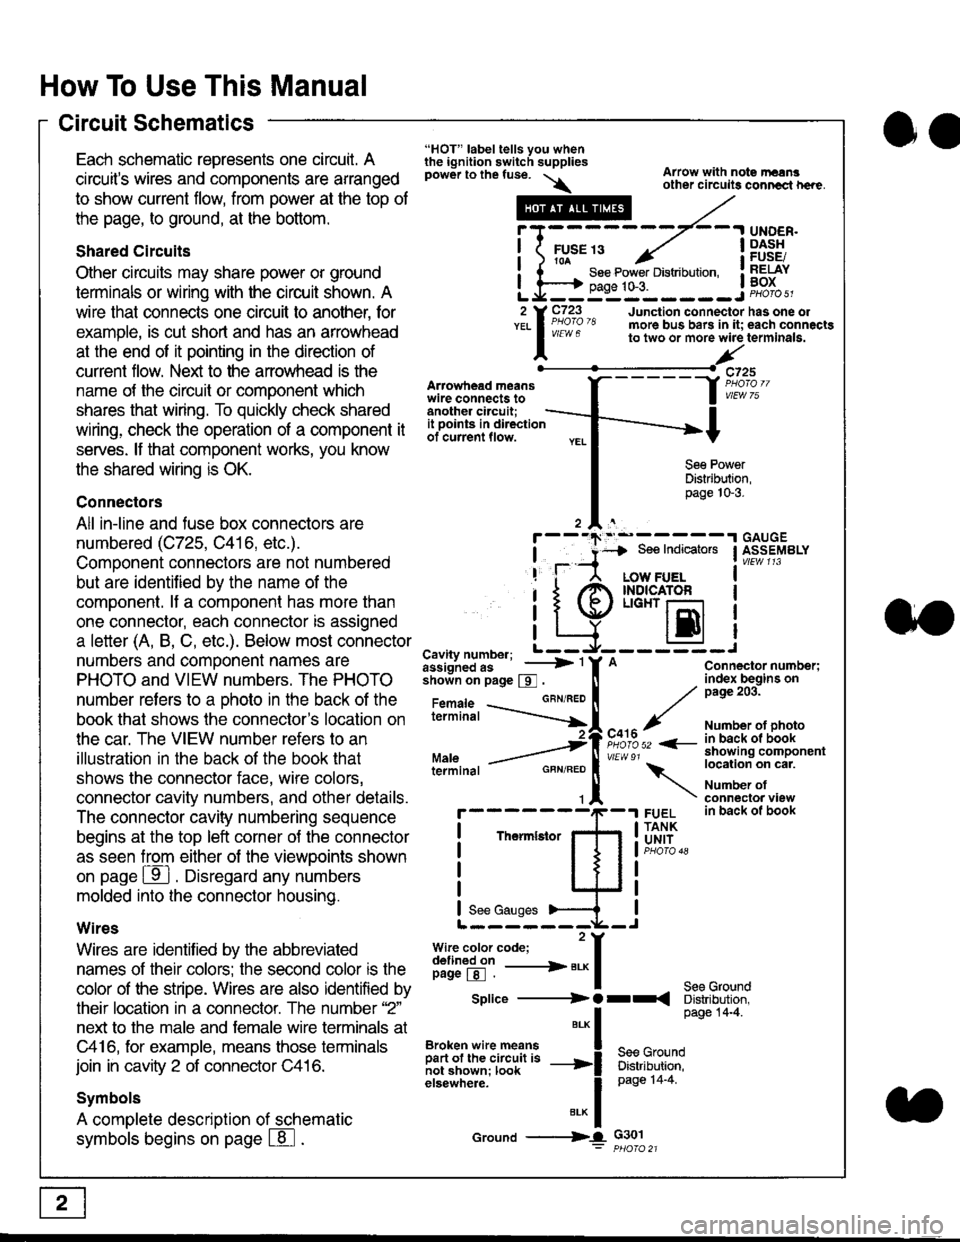 HONDA CIVIC 1996 6.G Workshop Manual How To Use This Manual
Circuit Schematics
oa
Each schematic represents one circult. A
circuits wires and components are arranged
to show current flow, from power at the top of
the page, to ground, at